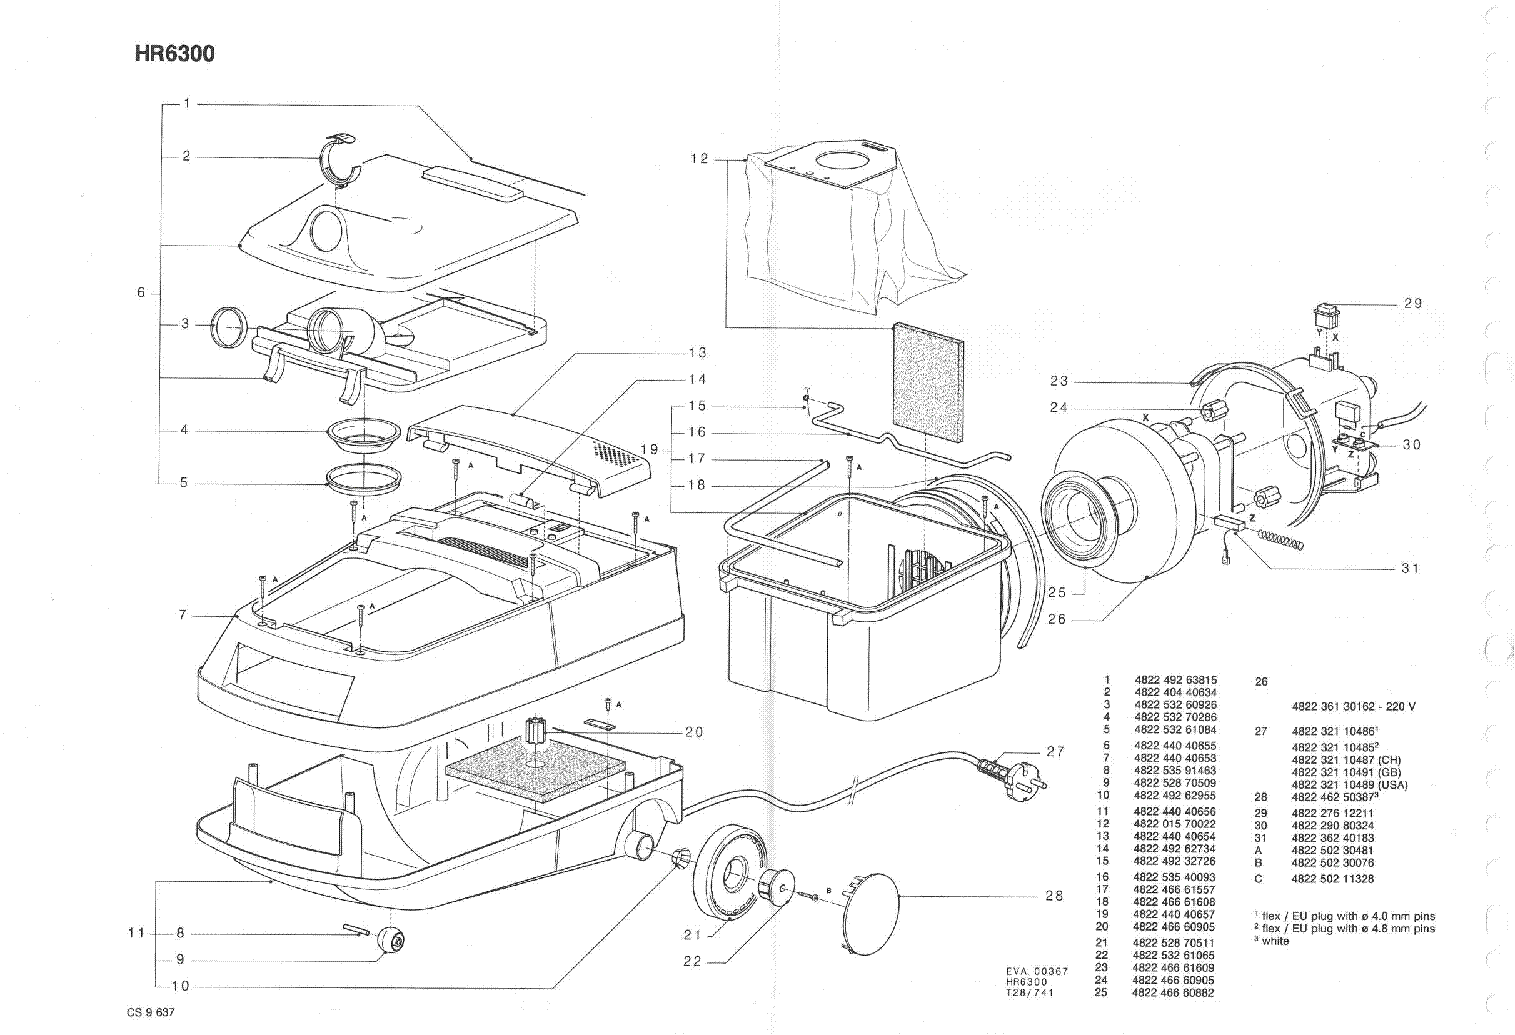 PHILIPS HR6300 SM service manual (2nd page)